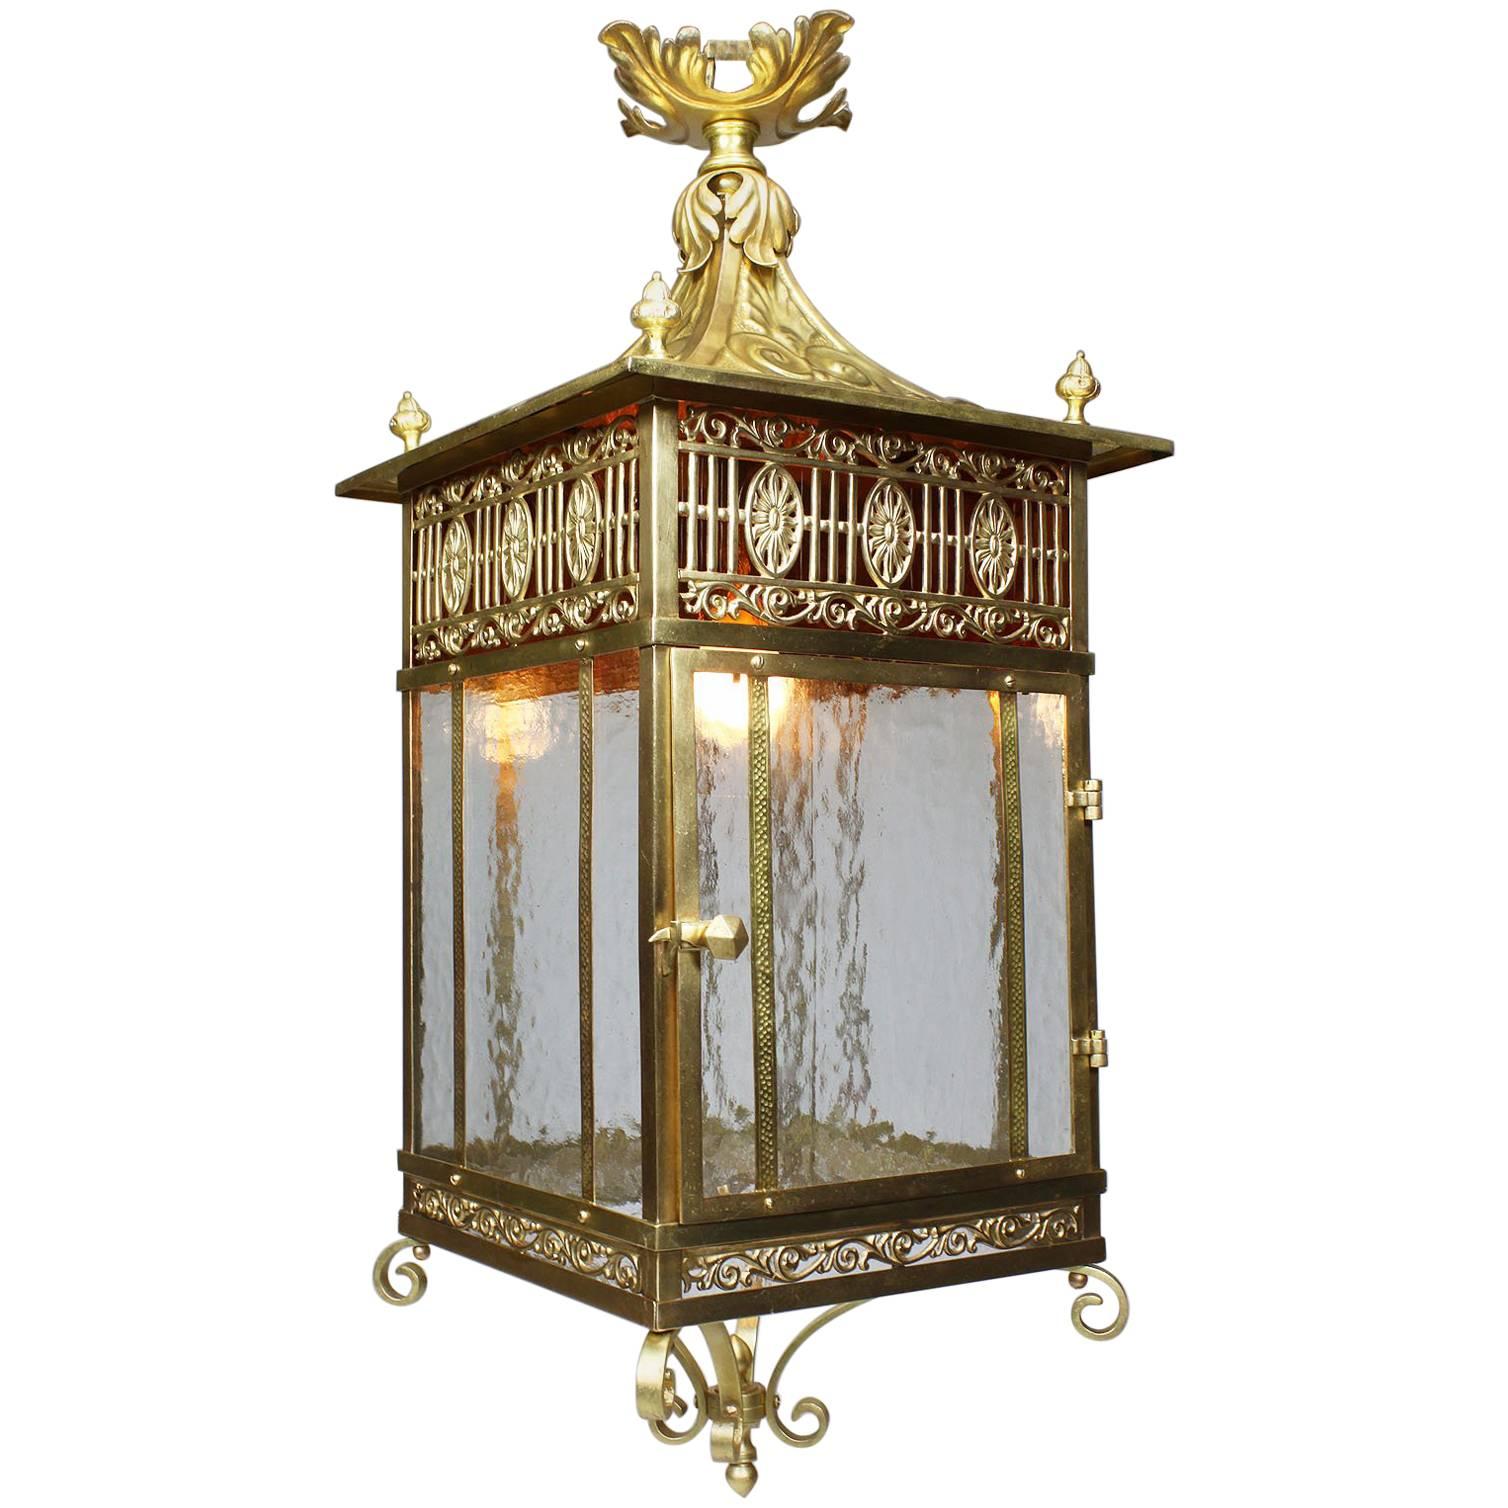 English Early 20th Century Chippendale Style Brass & Gilt-Metal Hanging Lantern